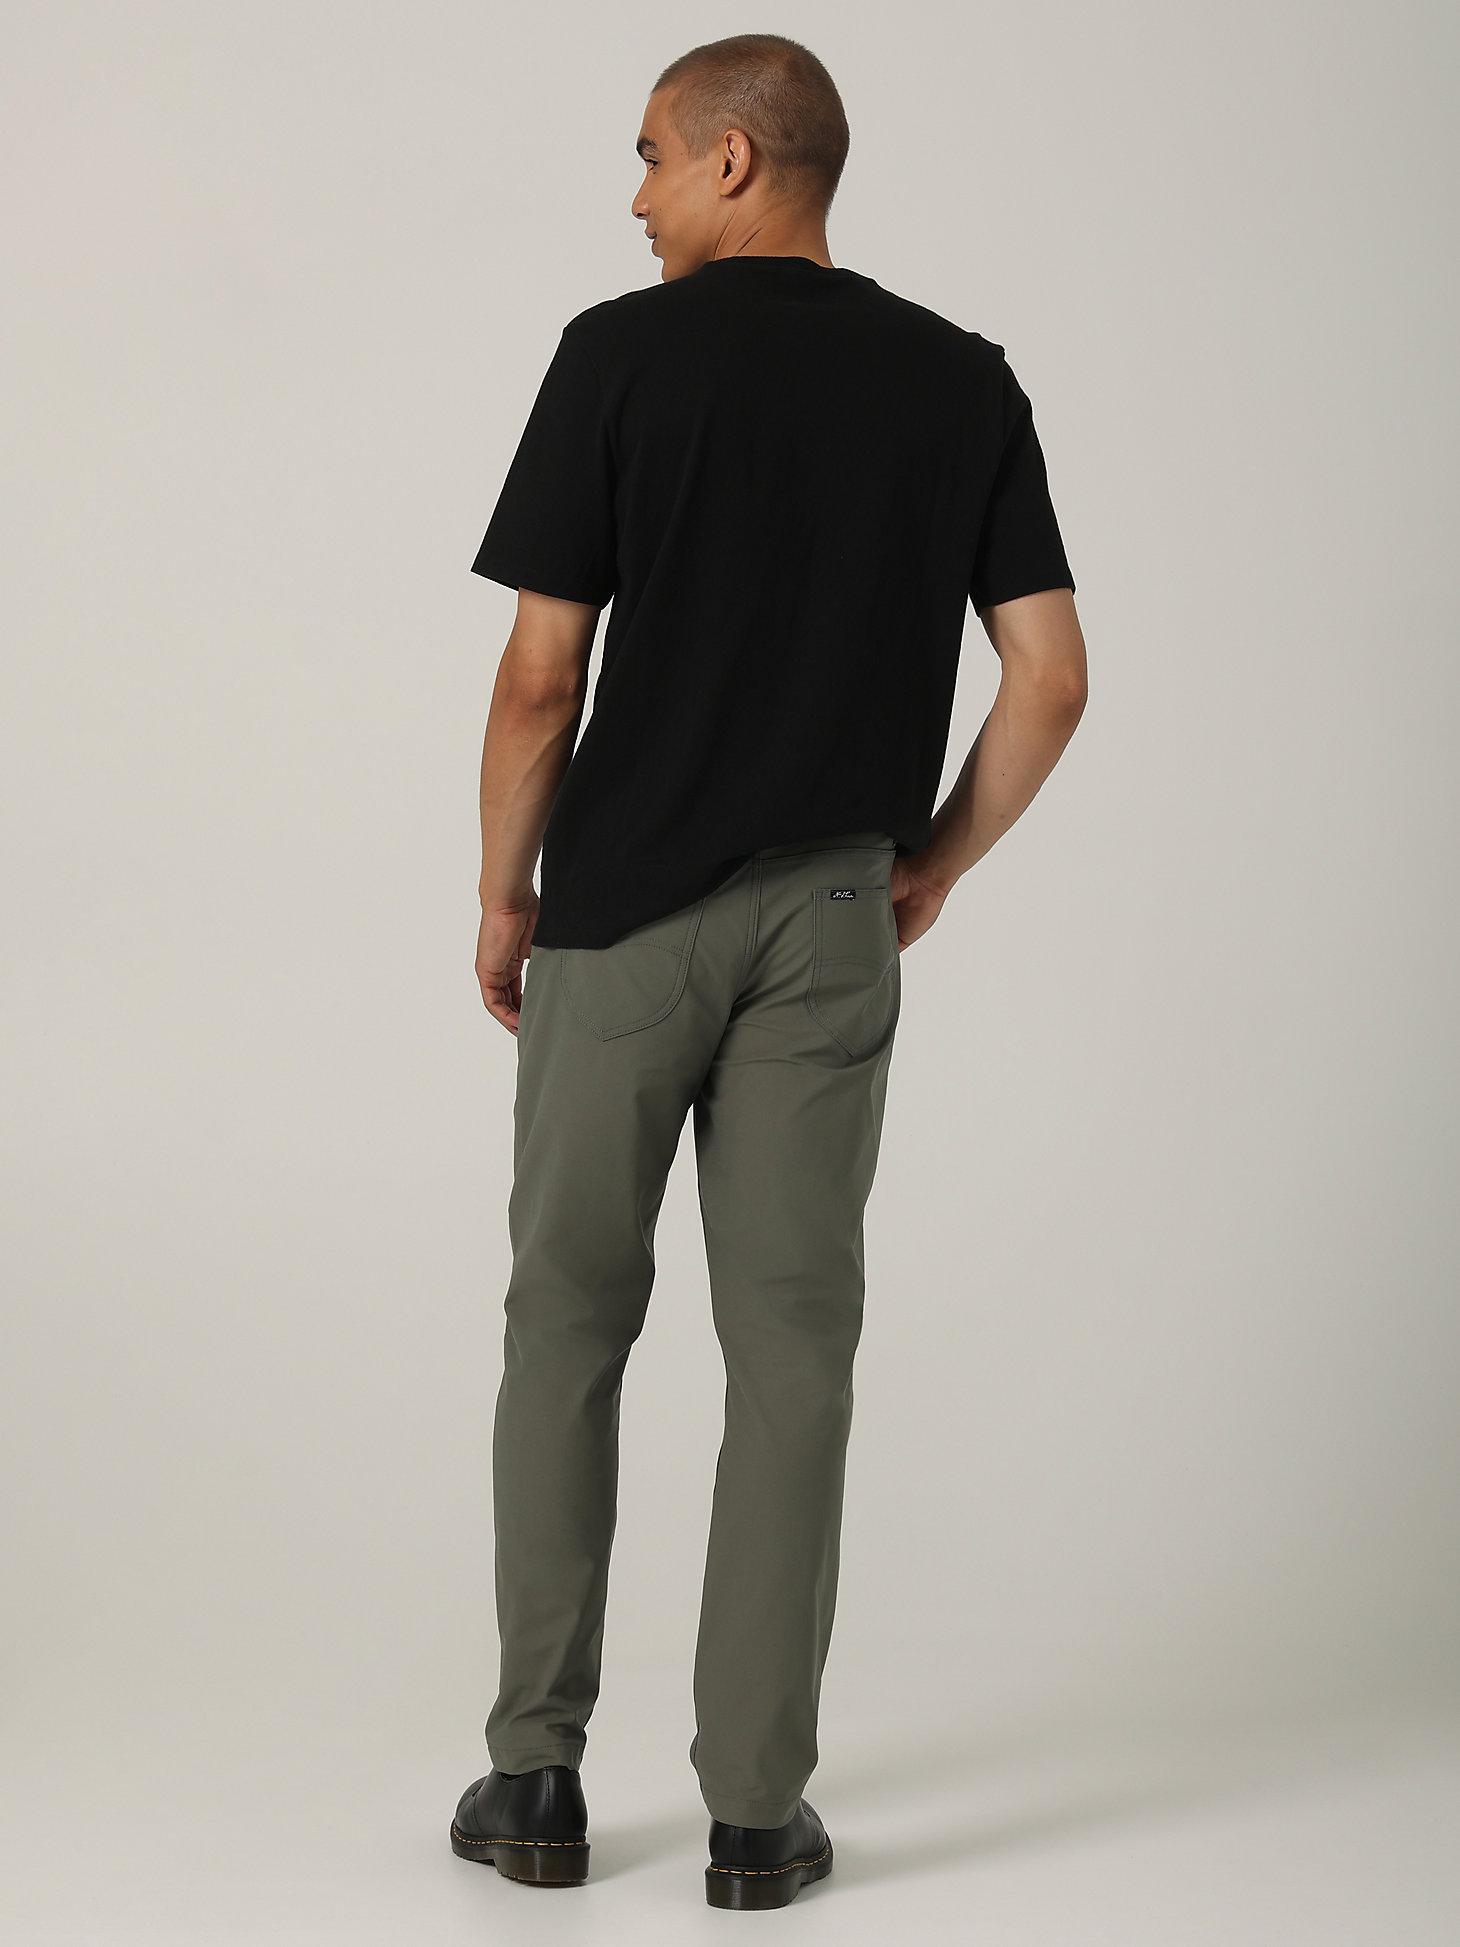 Men’s H.D. Maverick Relaxed Tapered Pant in Fort Green alternative view 1